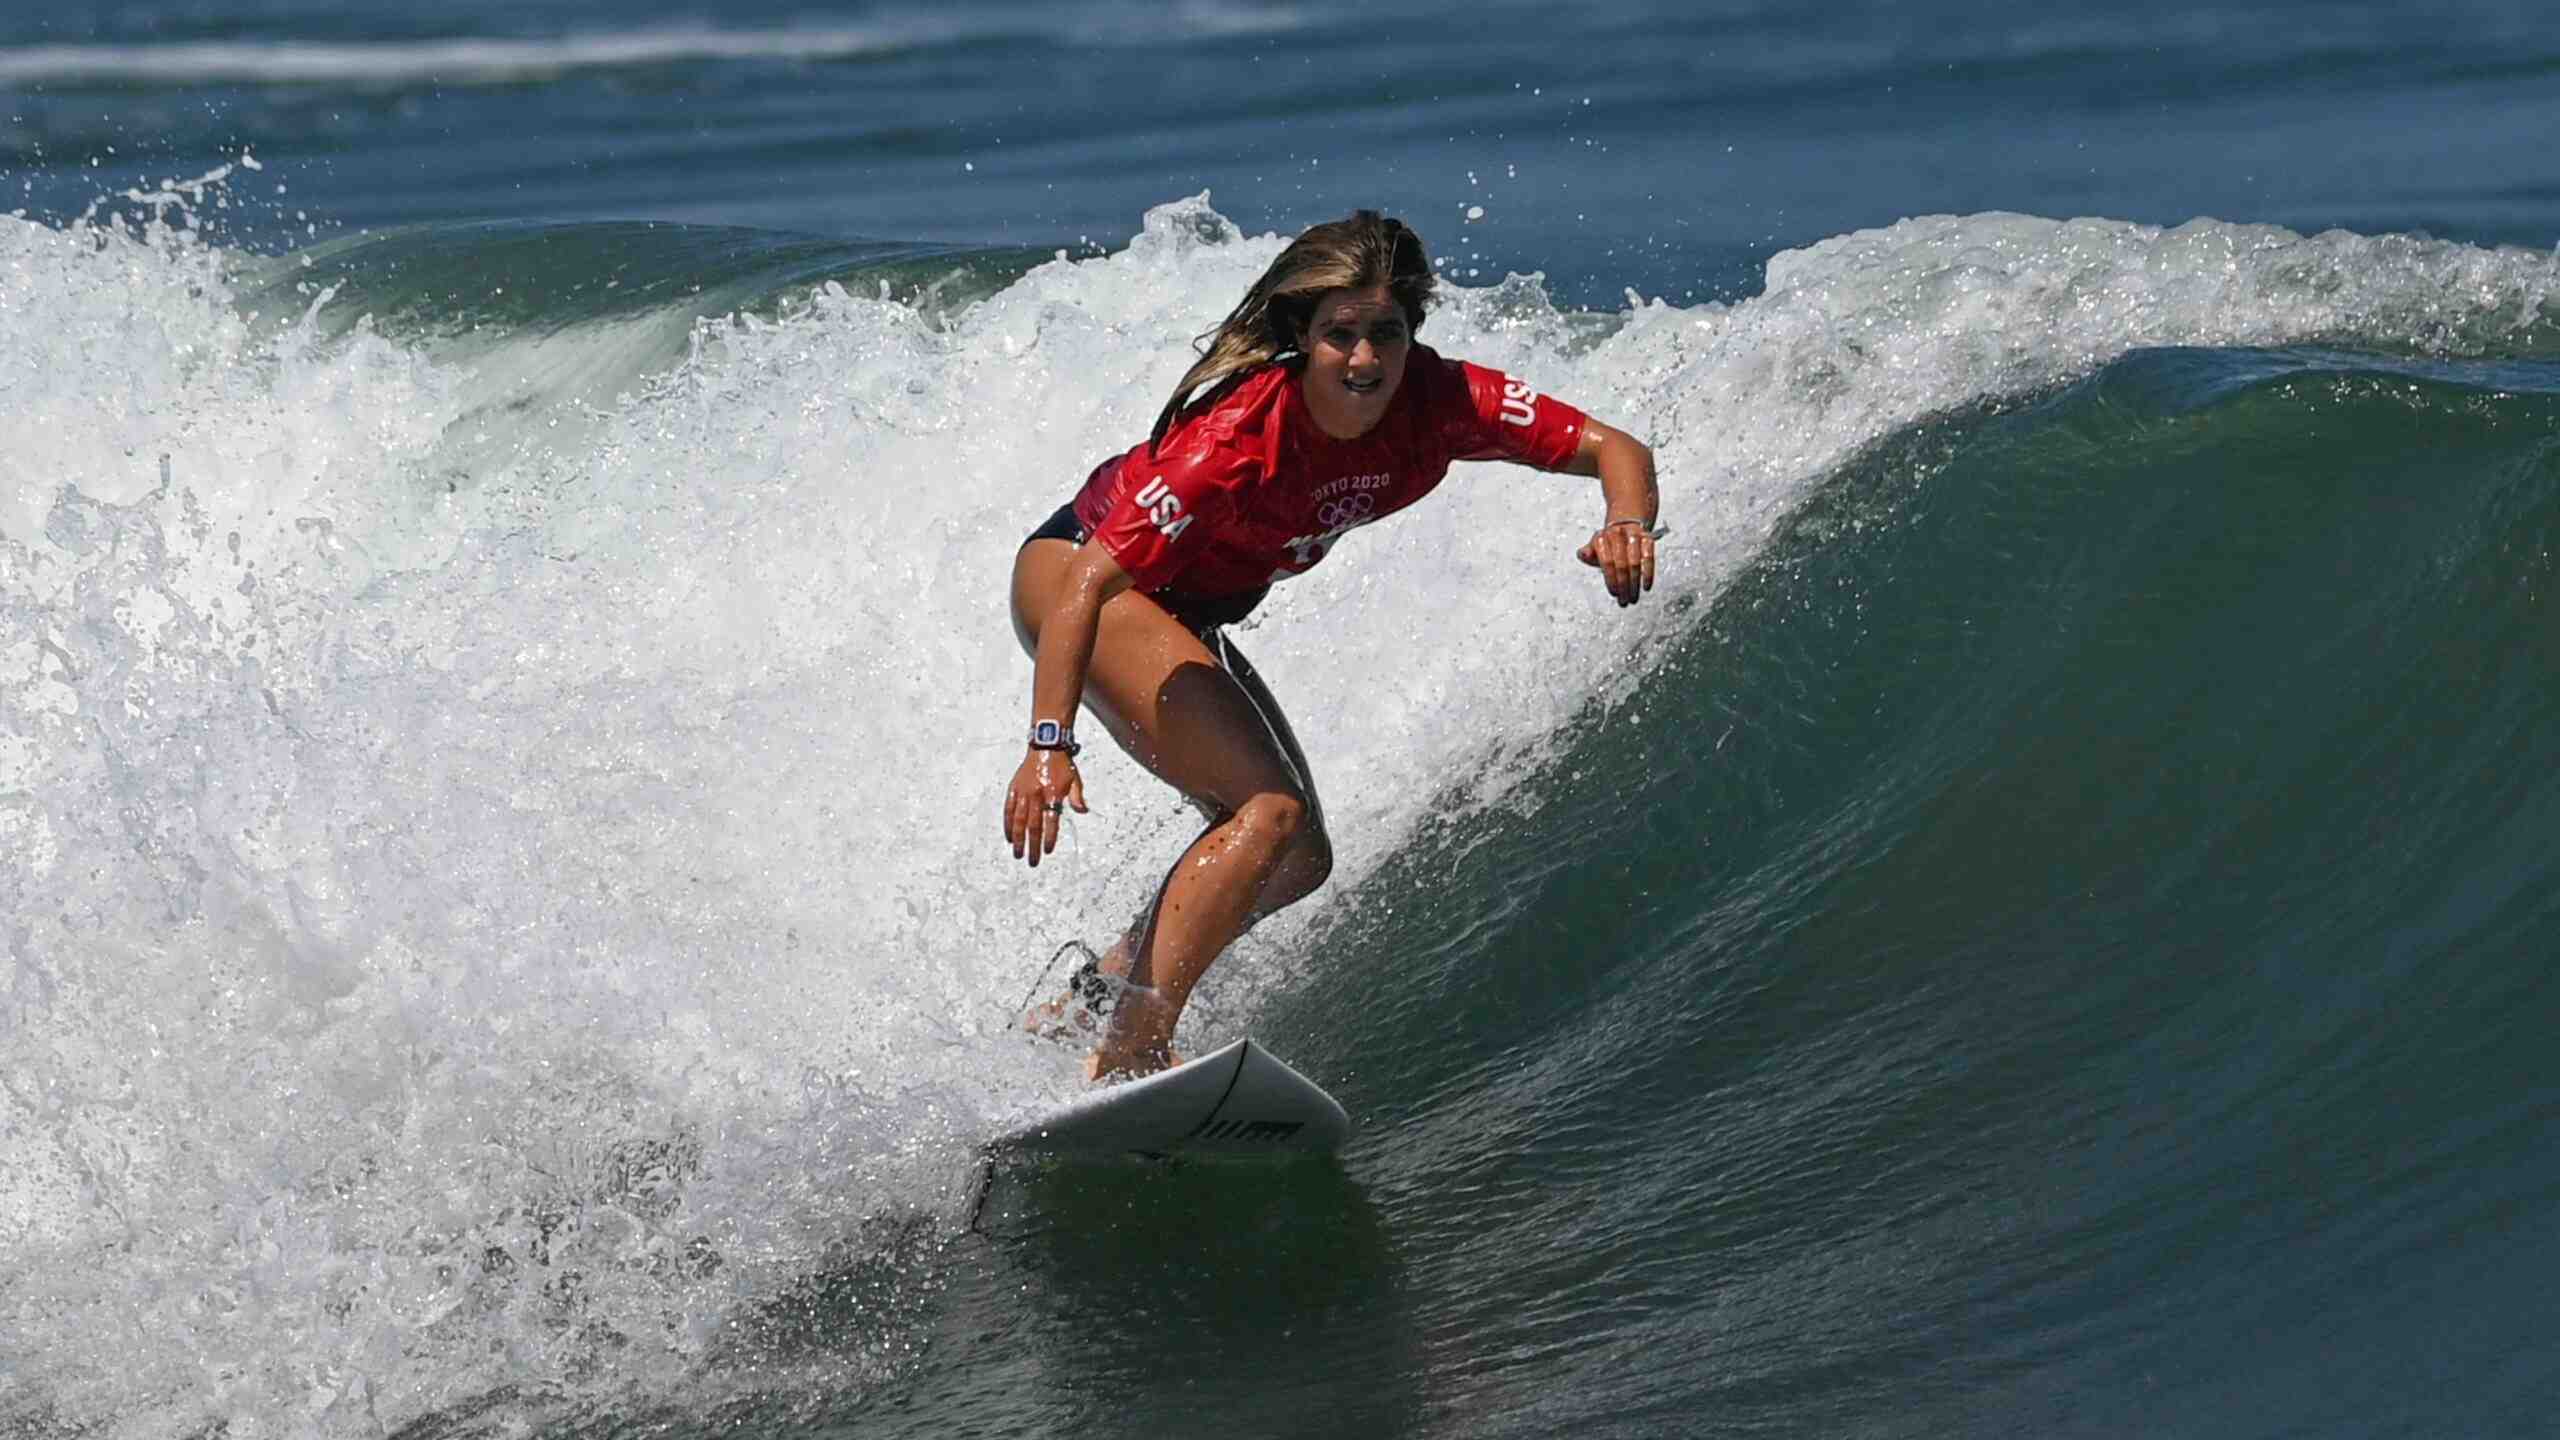 Are there any black professional surfers?